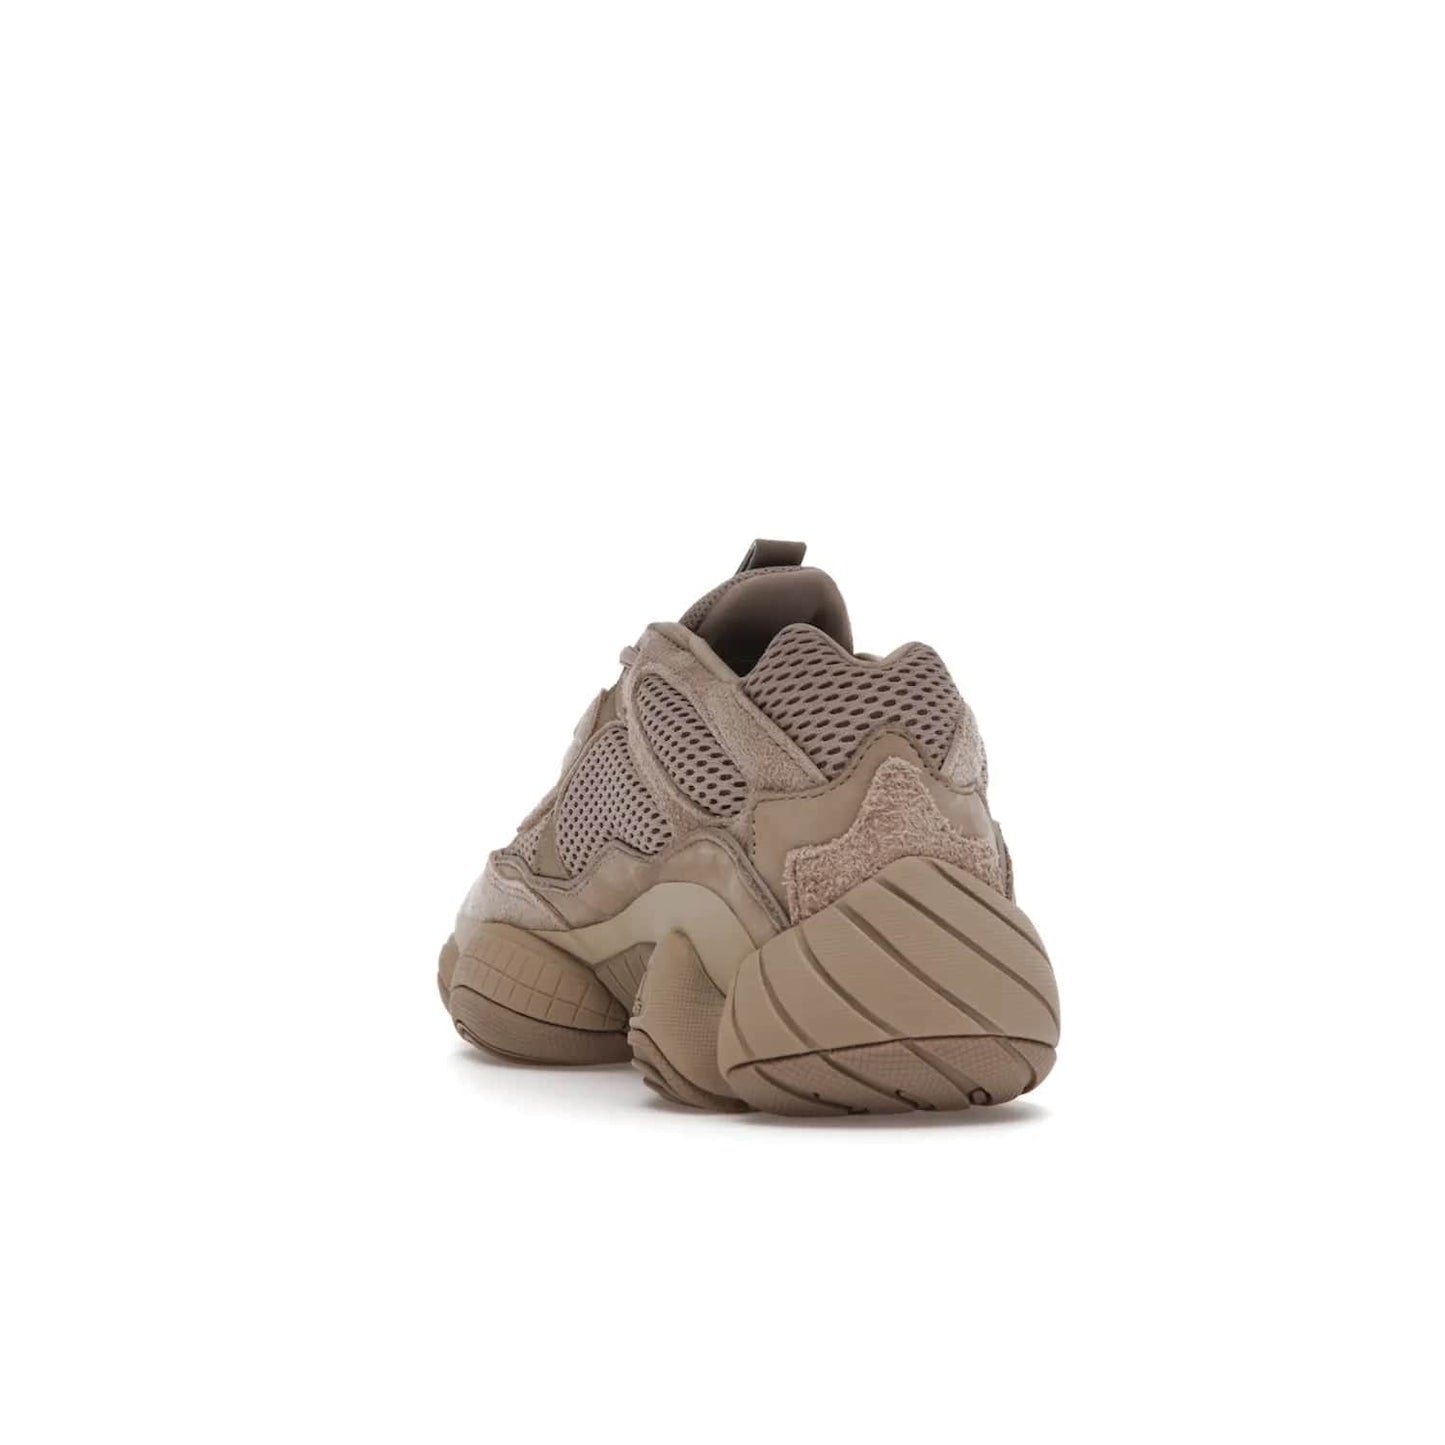 adidas Yeezy 500 Taupe Light - Image 26 - Only at www.BallersClubKickz.com - The adidas Yeezy 500 Taupe Light combines mesh, leather, and suede, with a durable adiPRENE sole for an eye-catching accessory. Reflective piping adds the perfect finishing touches to this unique silhouette. Ideal for any wardrobe, releasing in June 2021.